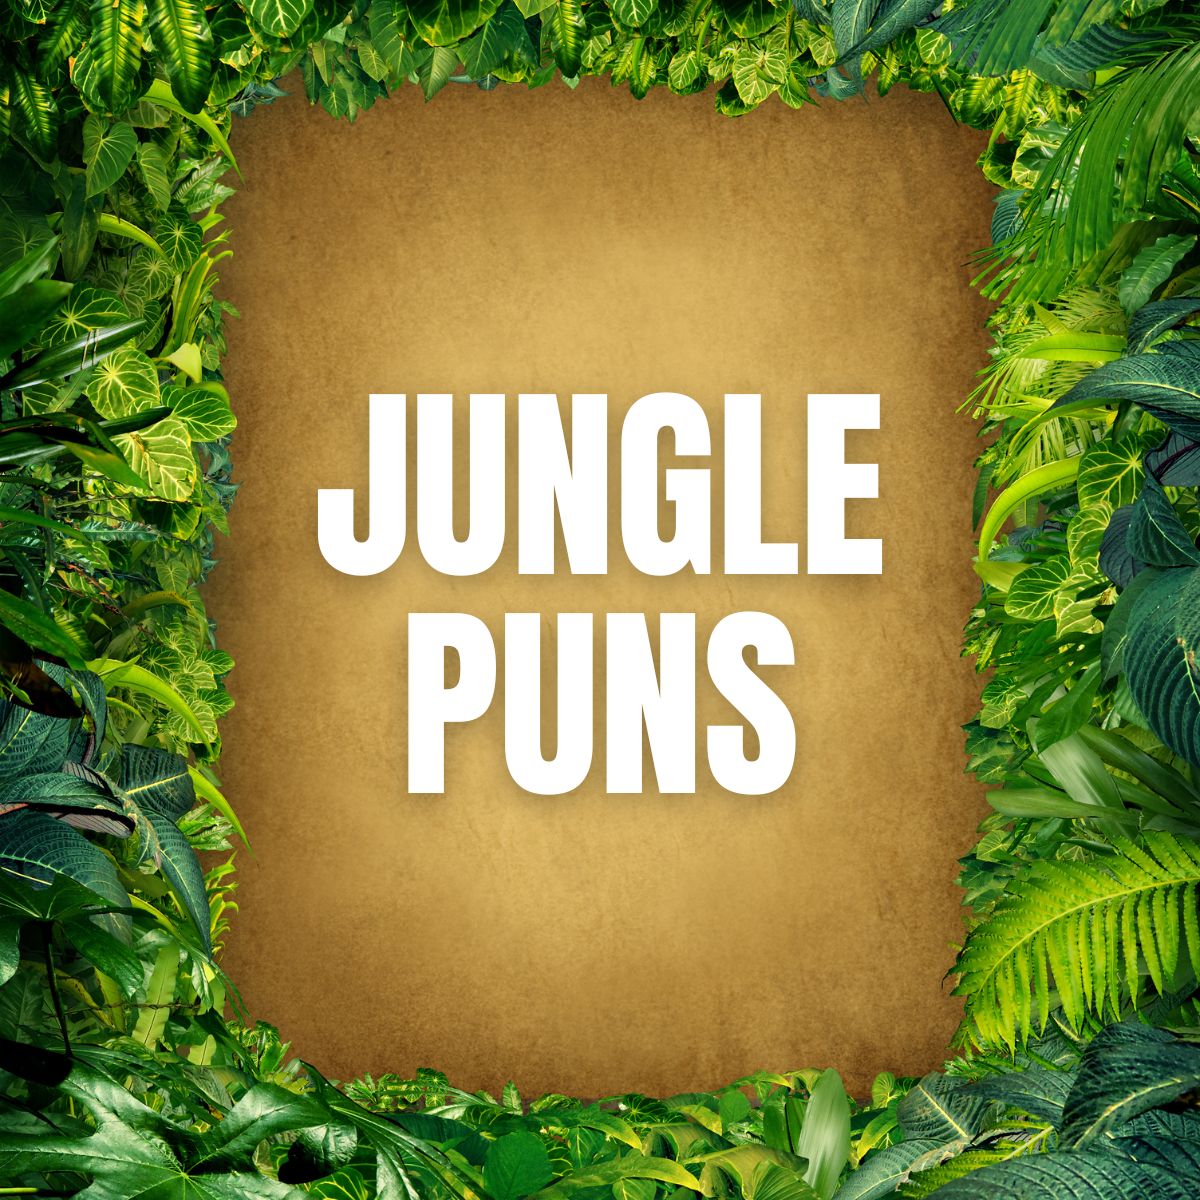 Jungle background with writing